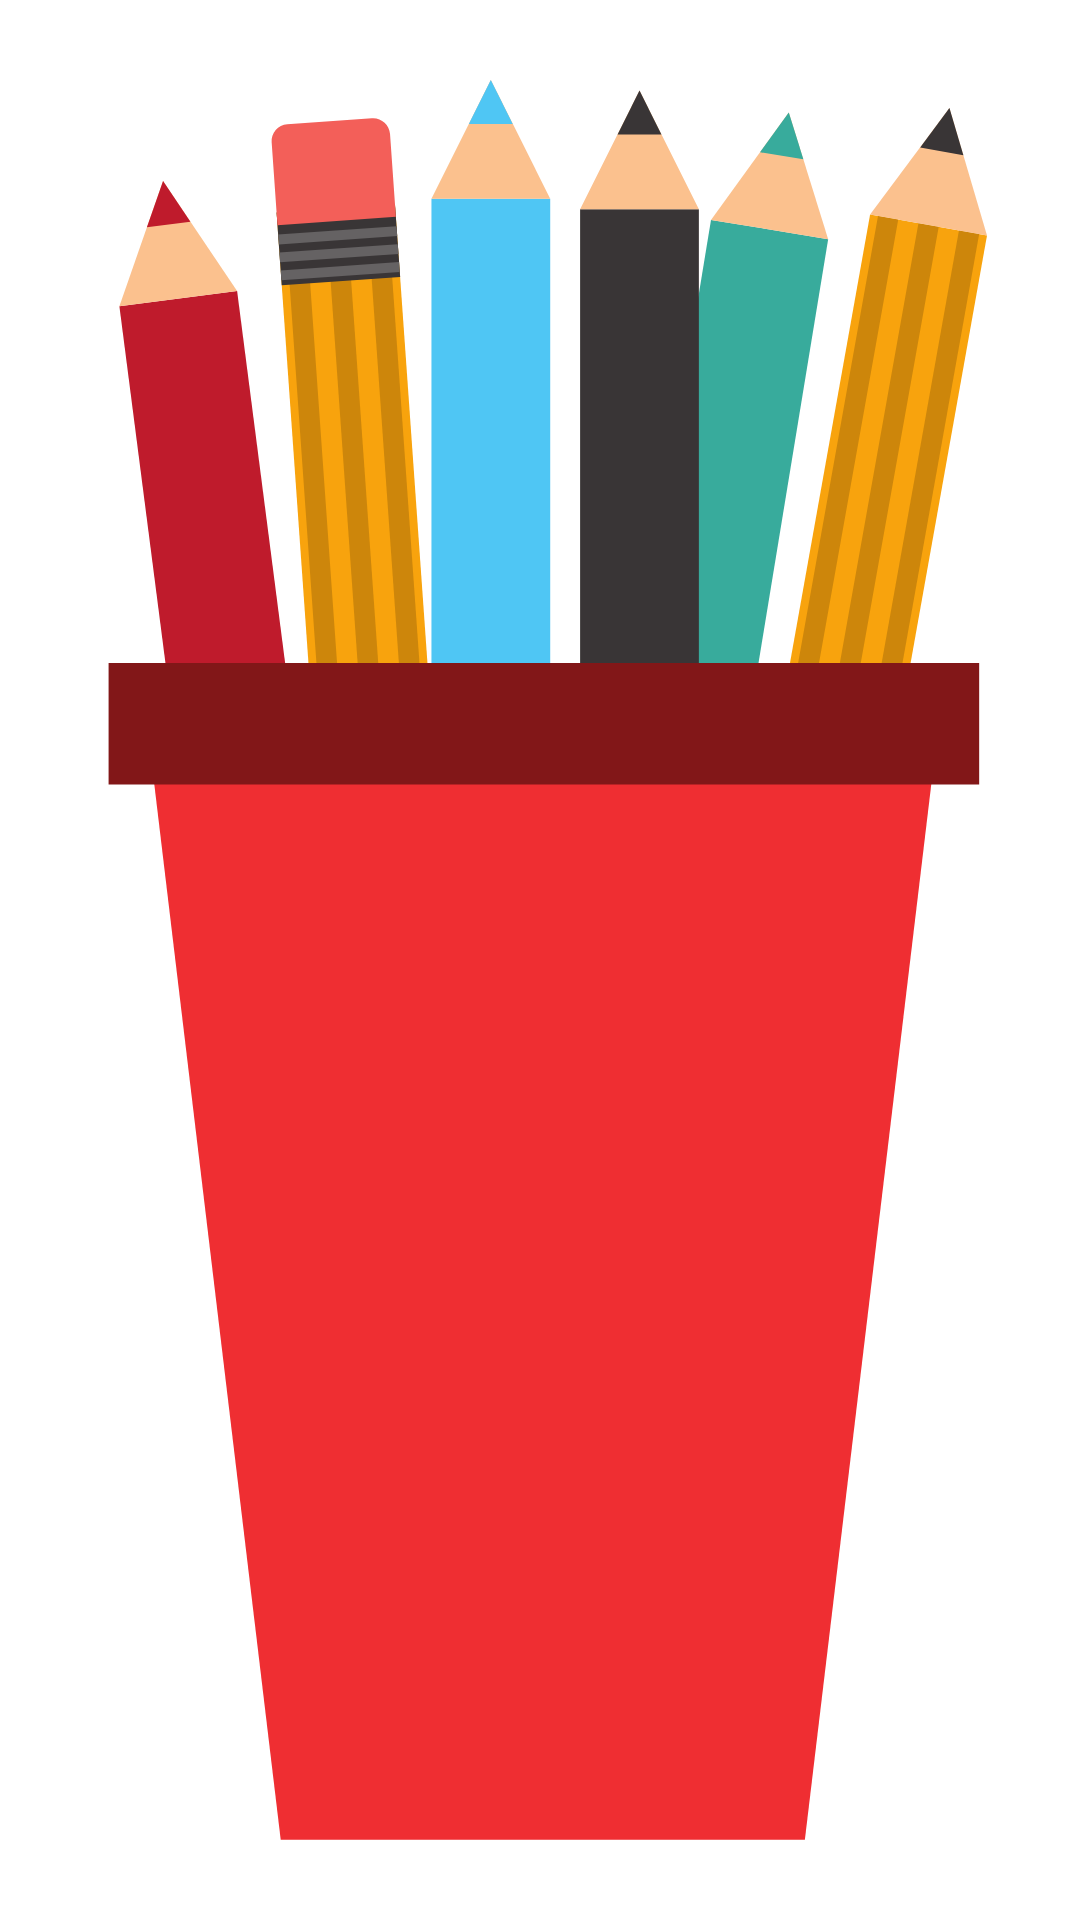 Cartoon graphic of a red pencil pot